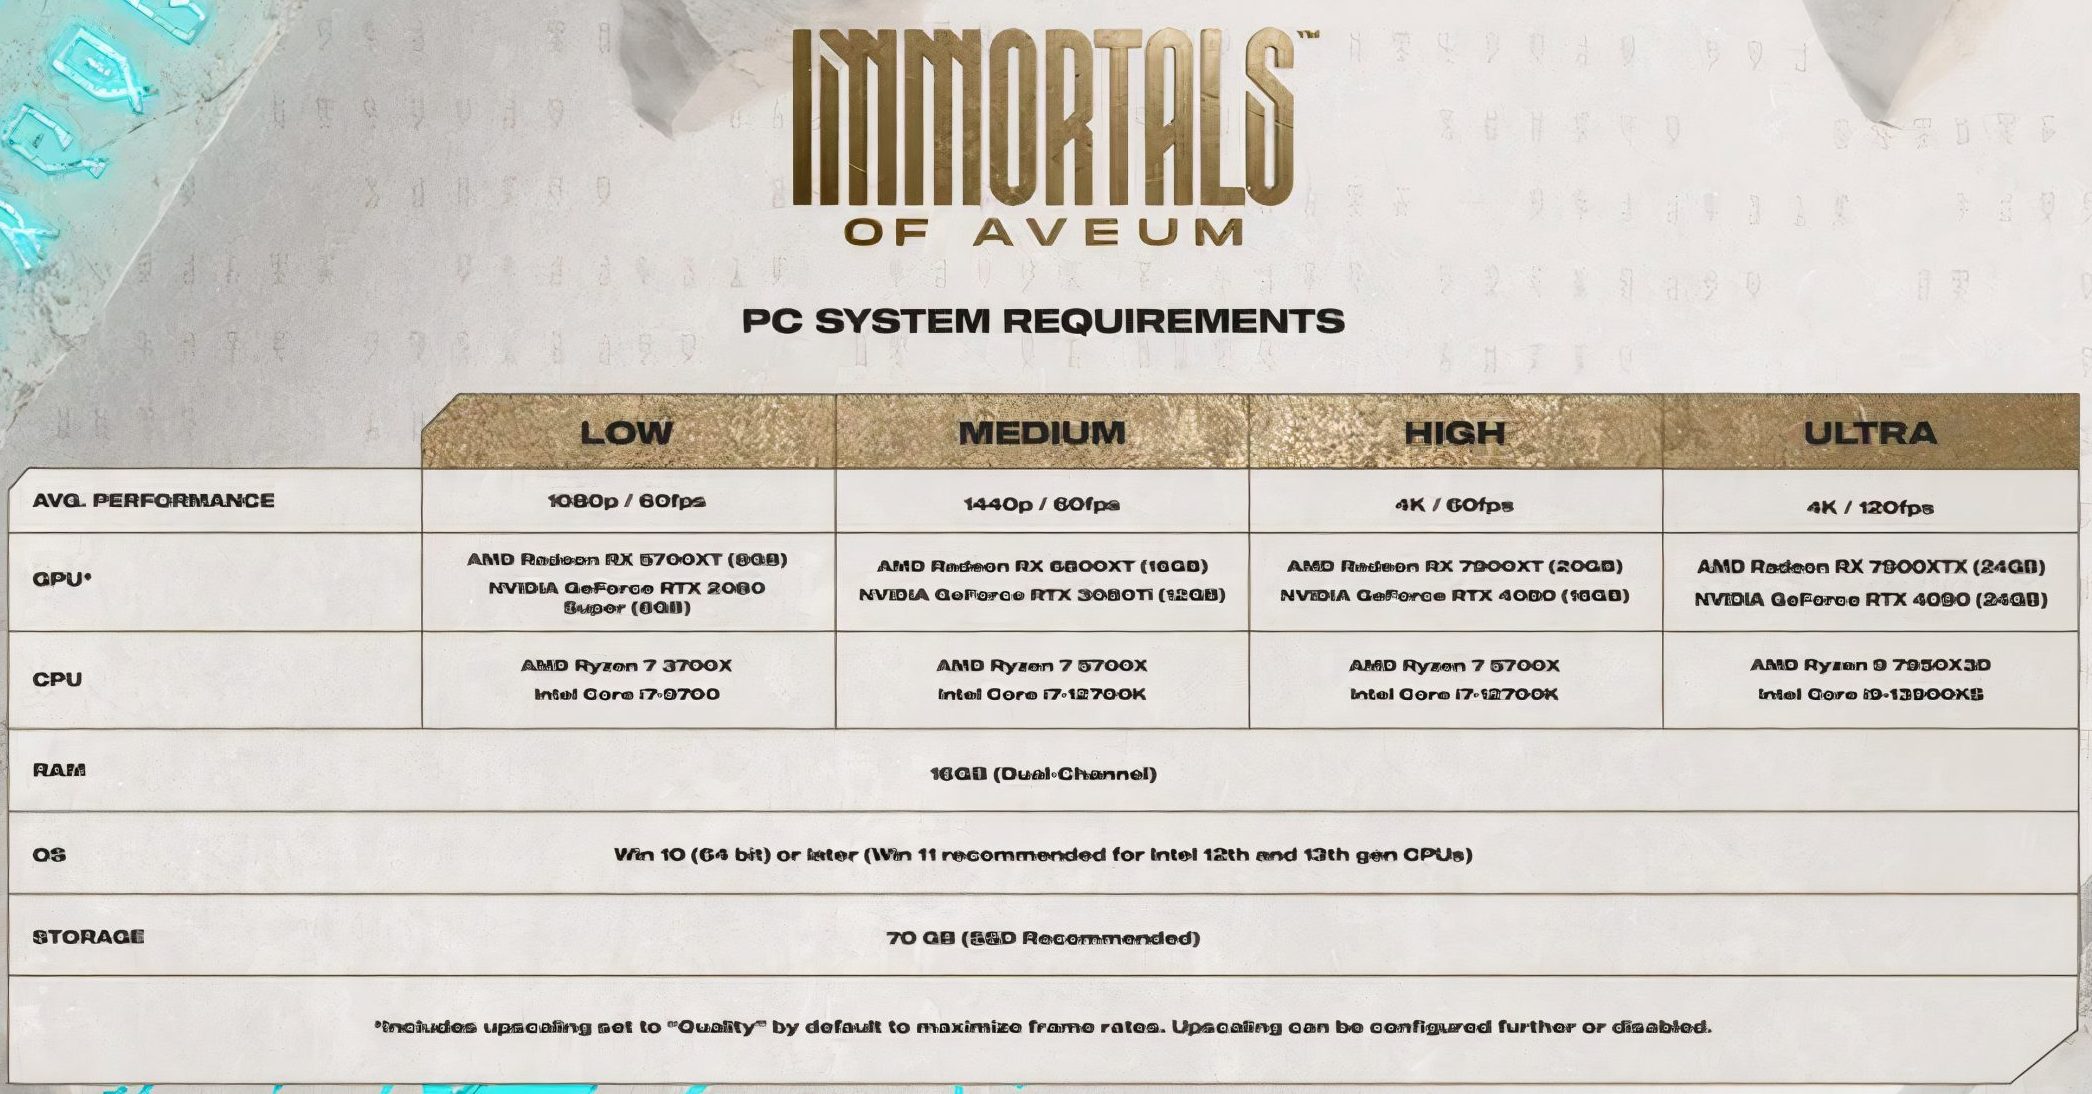 Immortals of Aveum System Requirements PC